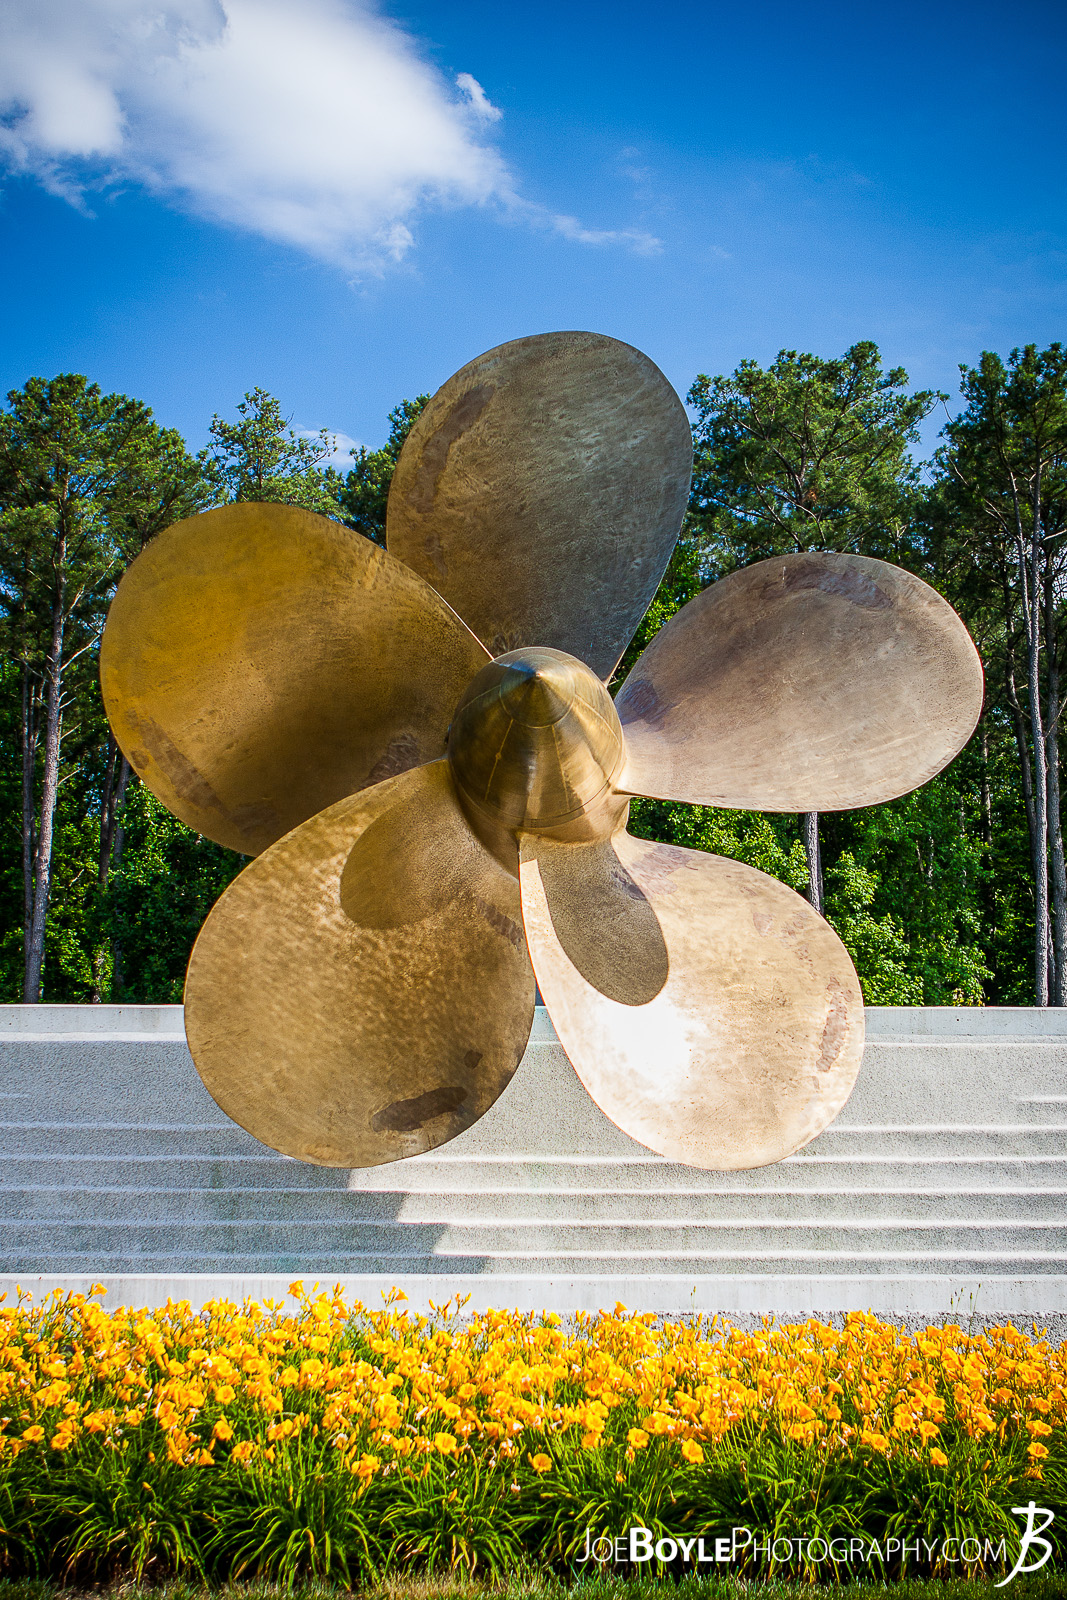  This propeller on display at the Mariner's Museum and Park is from the SS United States which was a record-setting trans Atlantic passenger liner built by Newport News Shipbuilding and Drydock Company in the late 1940s. Read the source & more about this propeller and the Mariner's Museum. 